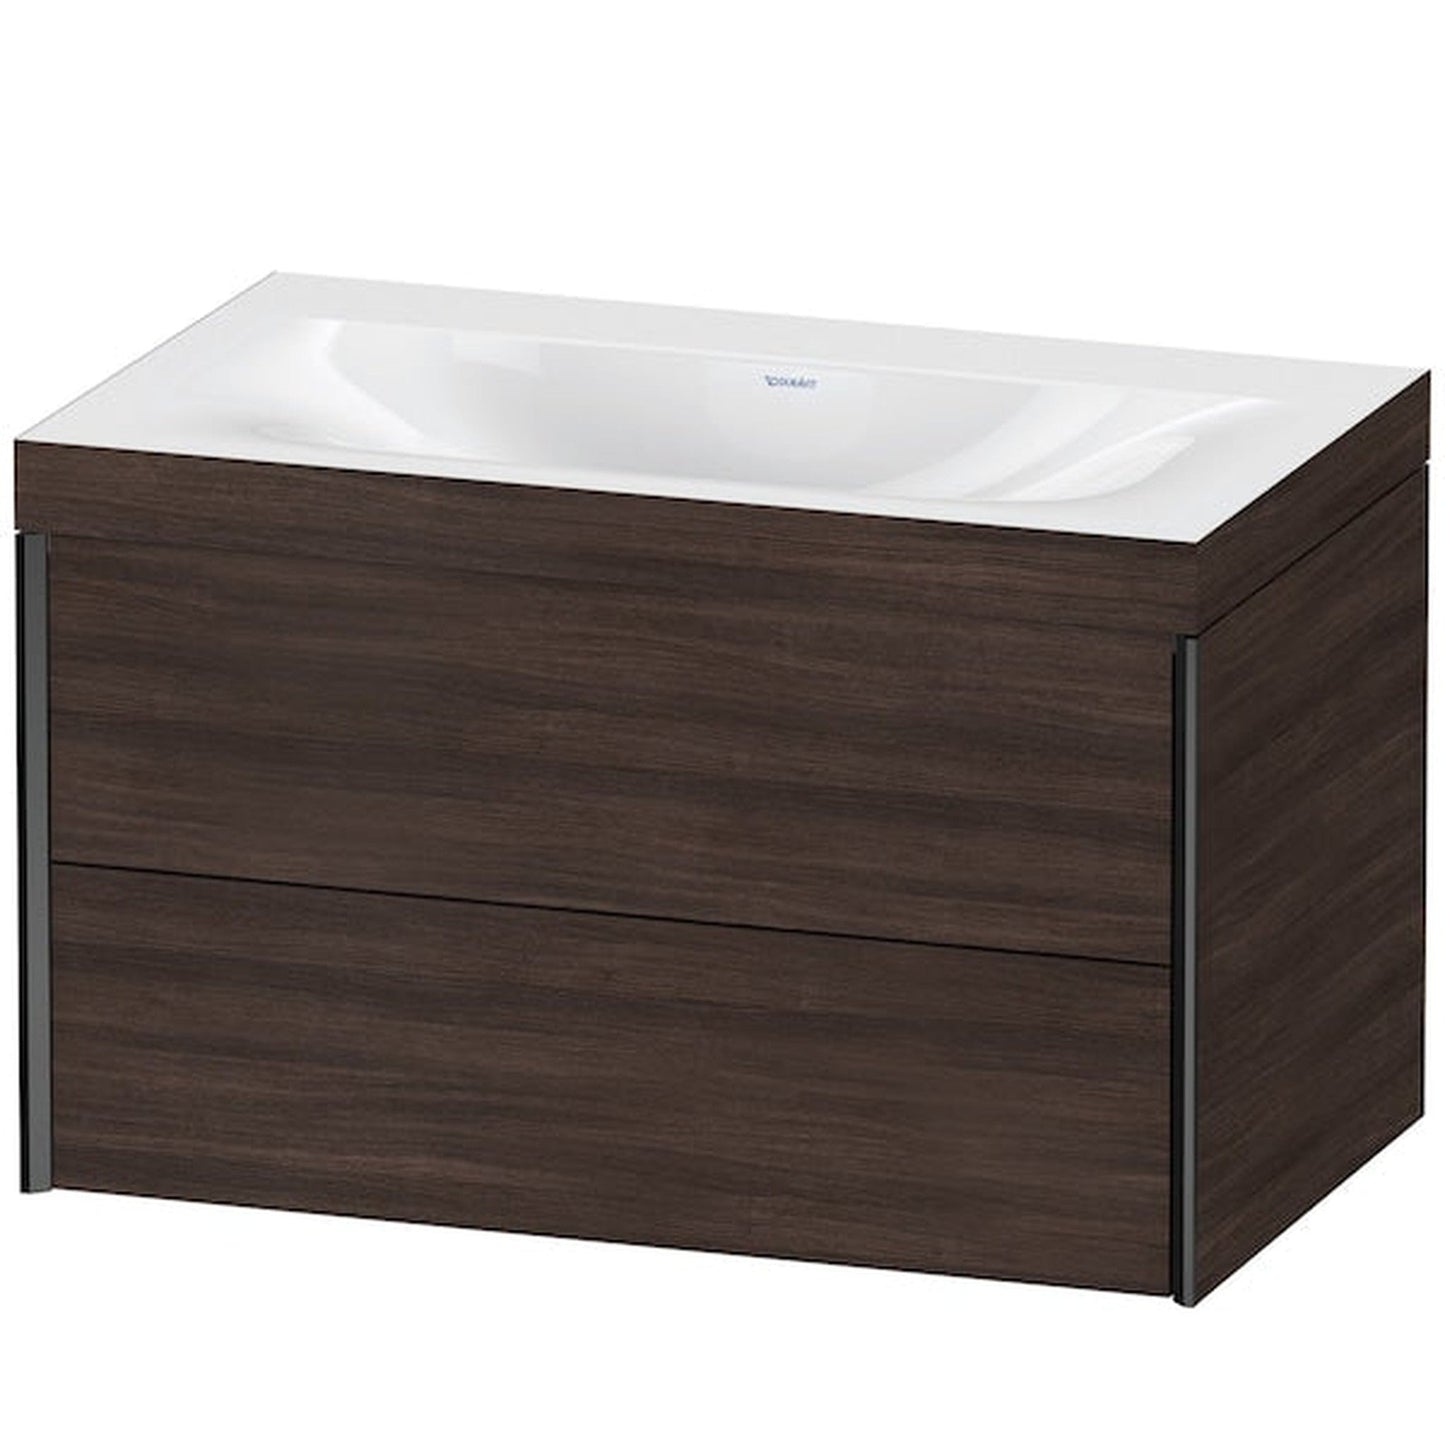 Duravit Xviu 31" x 20" x 19" Two Drawer C-Bonded Wall-Mount Vanity Kit Without Tap Hole, Chestnut Dark (XV4615NB253C)